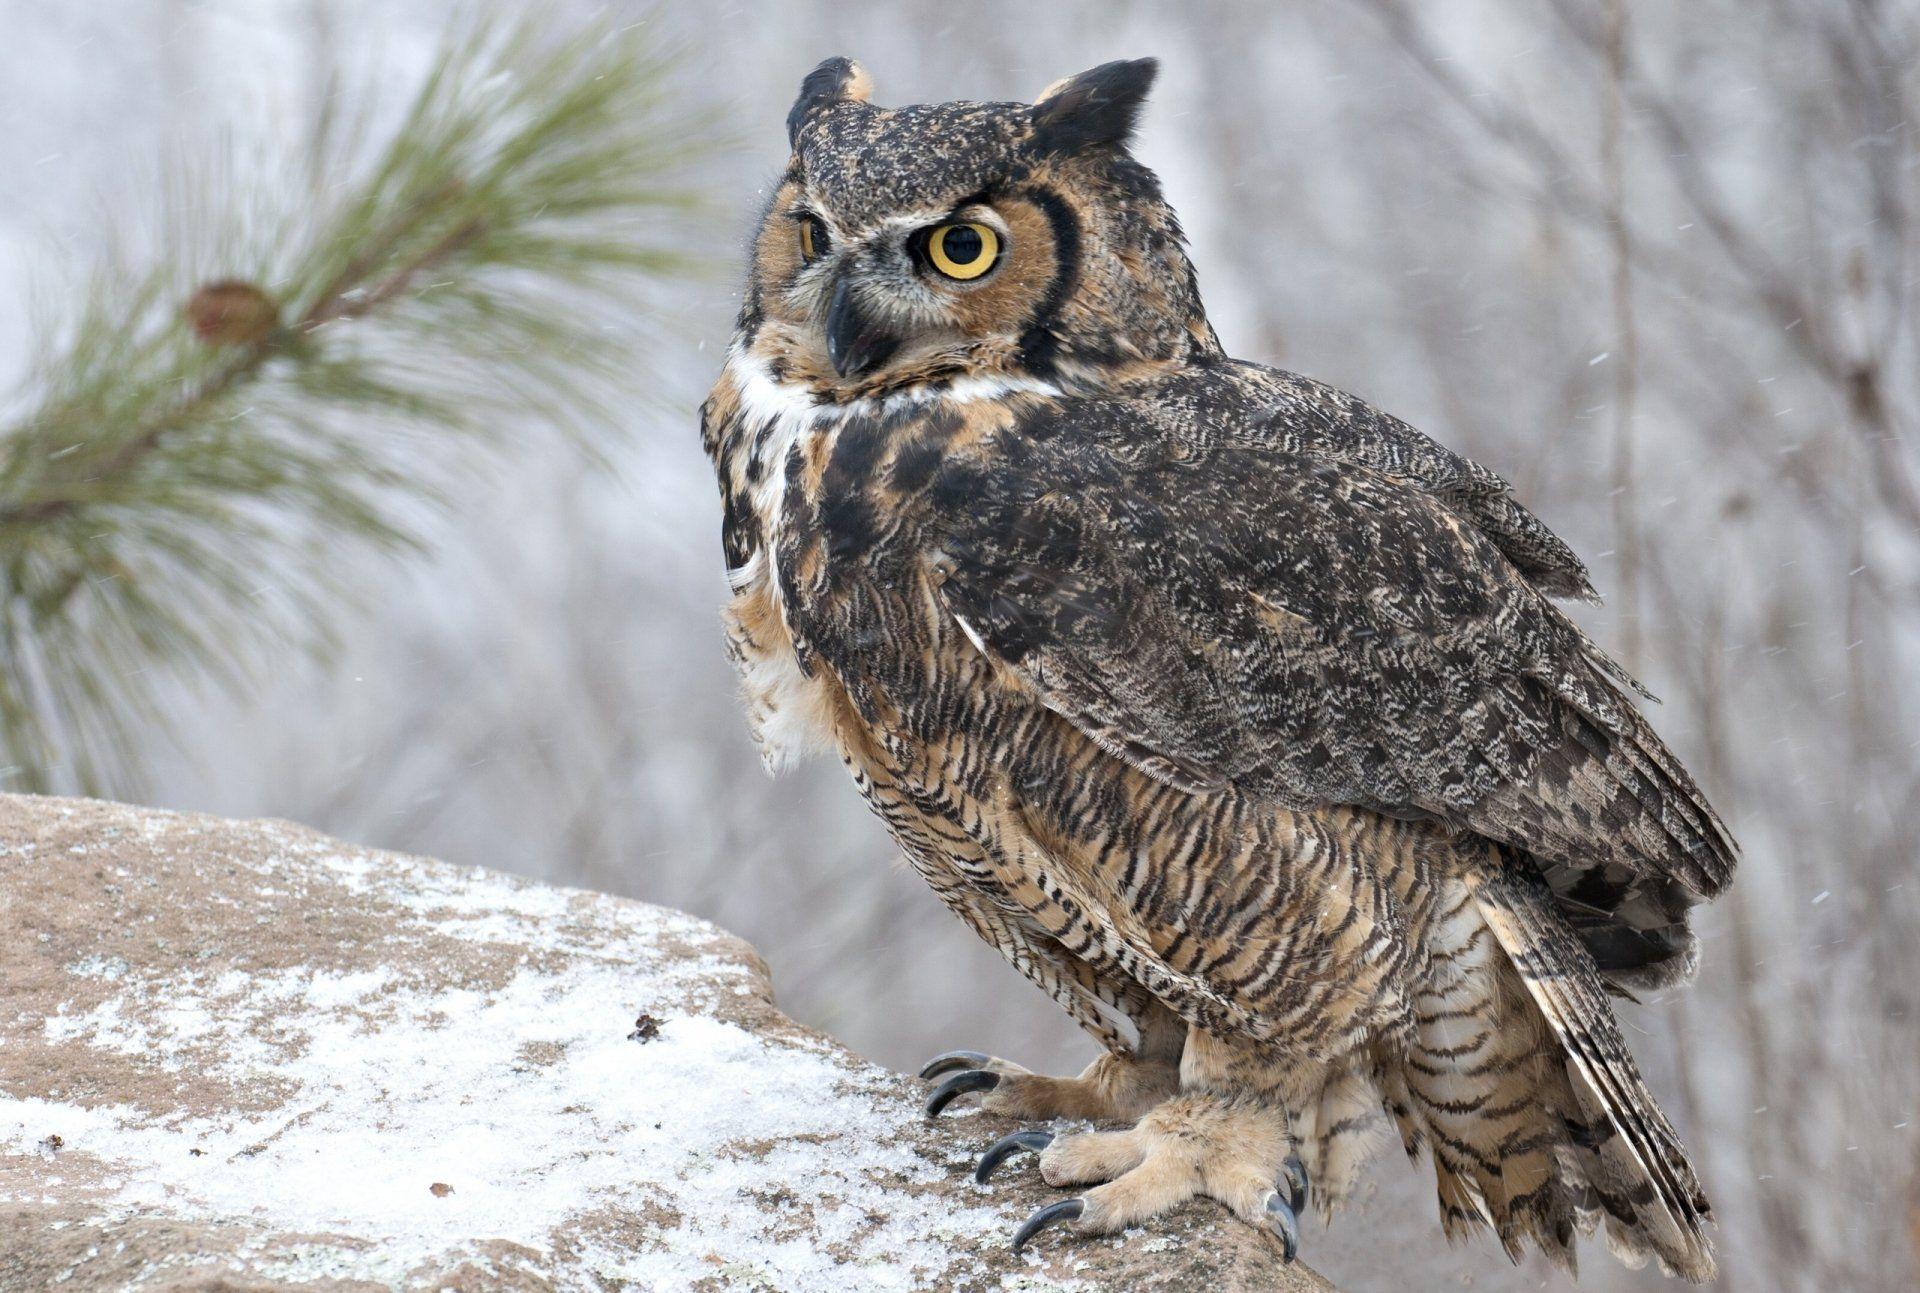 Great horned owl Wallpaper Background Image. View